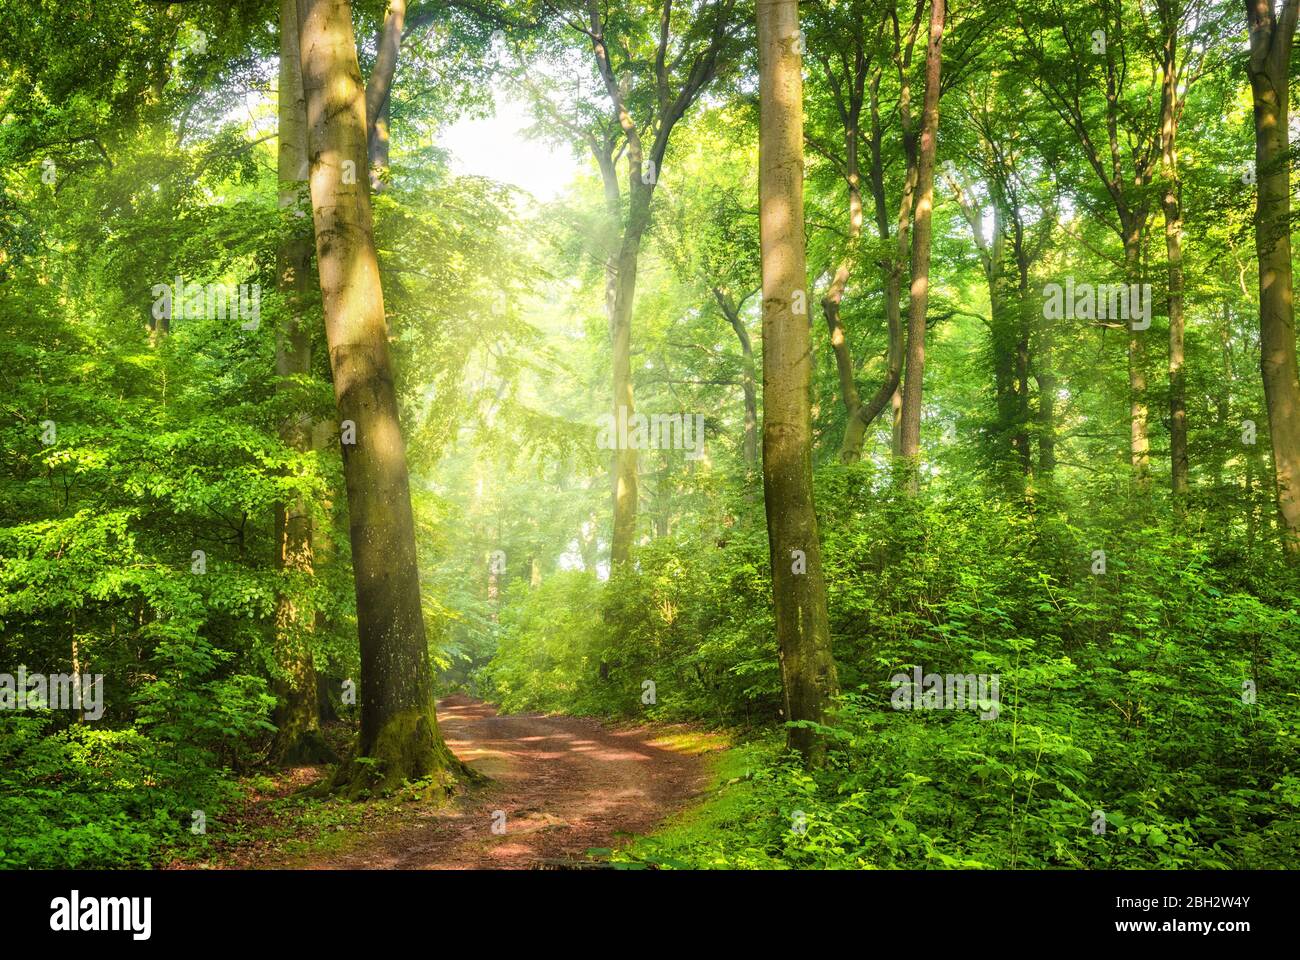 Green forest with wafts of mist and the warm sunlight falling through them unto a curved path Stock Photo